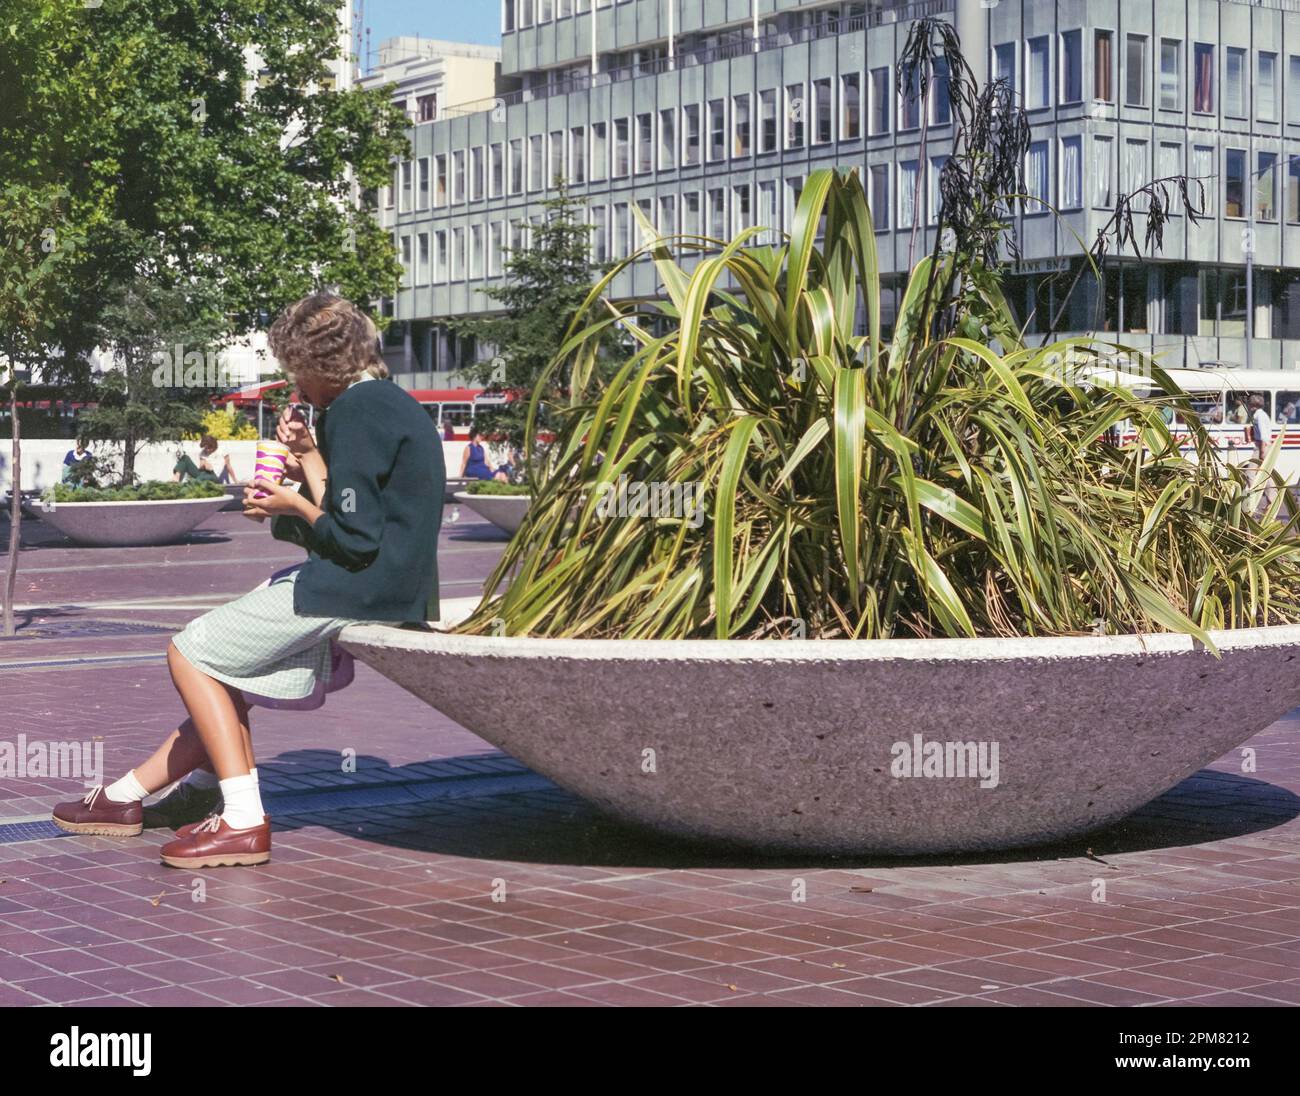 A 1981 historic image of two teenagers in Christchurch Girls High School (CGHS) uniforms sitting on the edge of a large dish potplant in front of the BNZ building in Cathedral Square, Christchurch, on the South Island of New Zealand Stock Photo